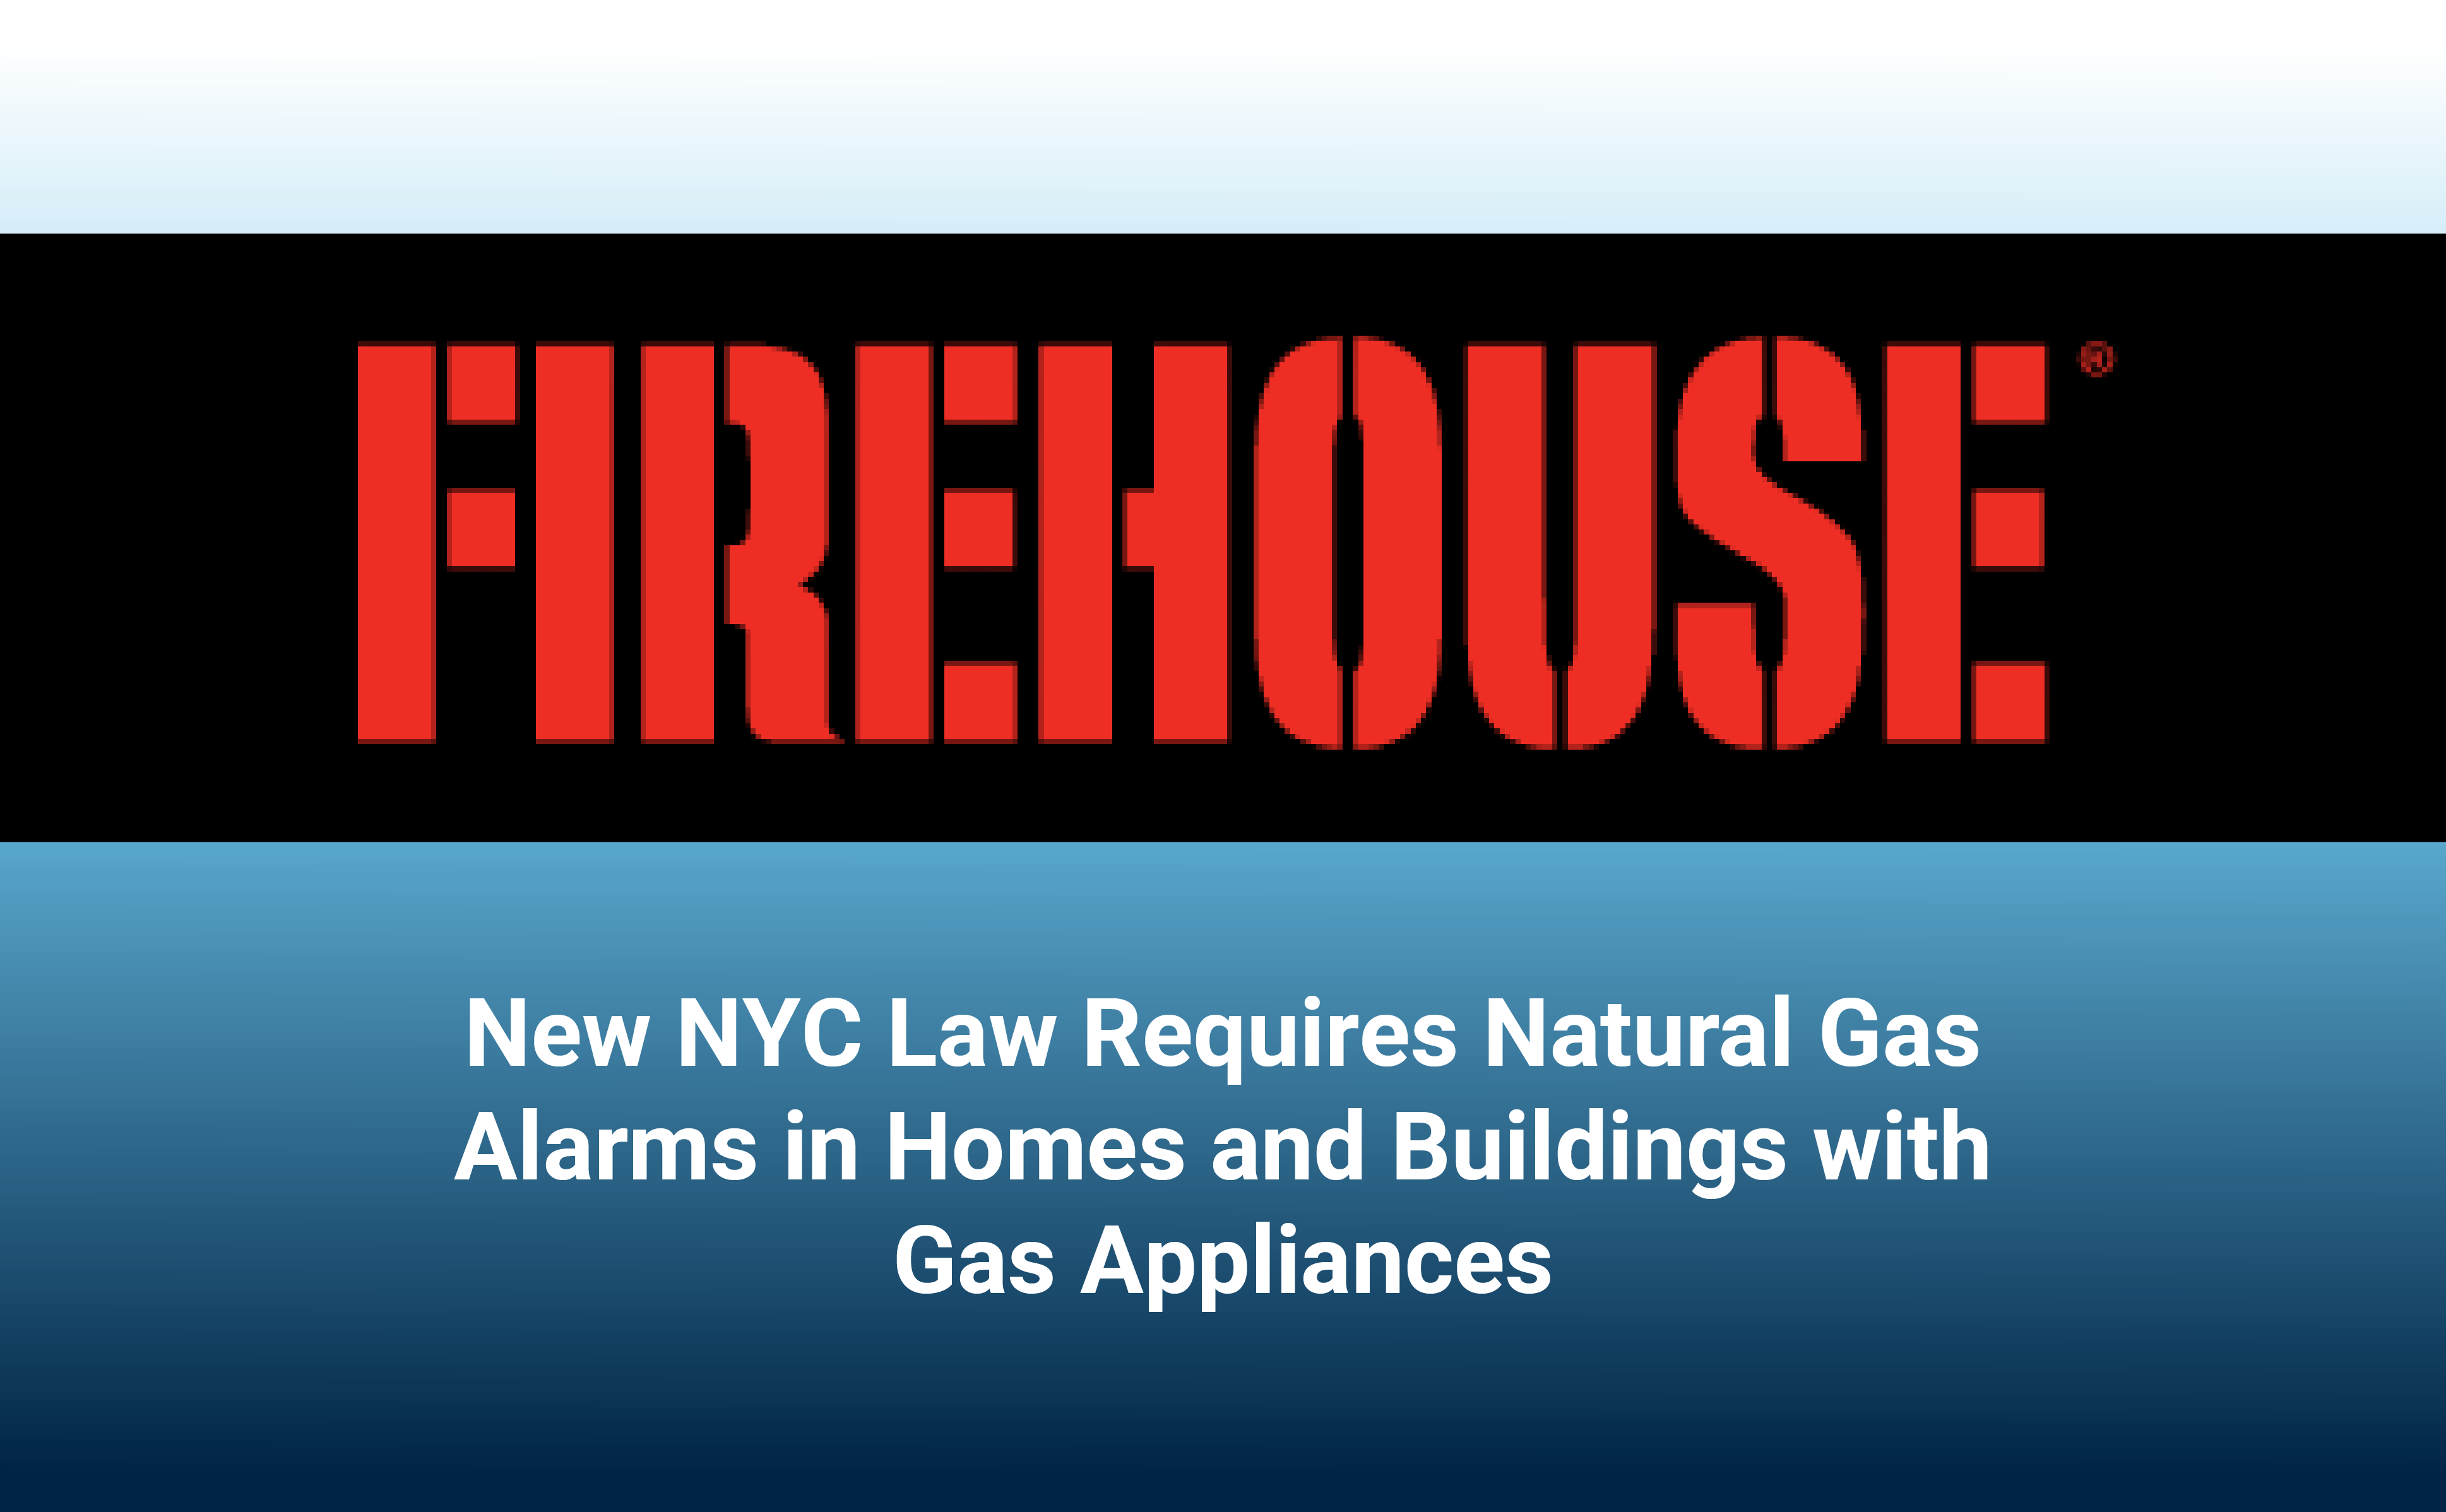 New NYC Law Requires Natural Gas Alarms in Homes and Buildings with Gas Appliances